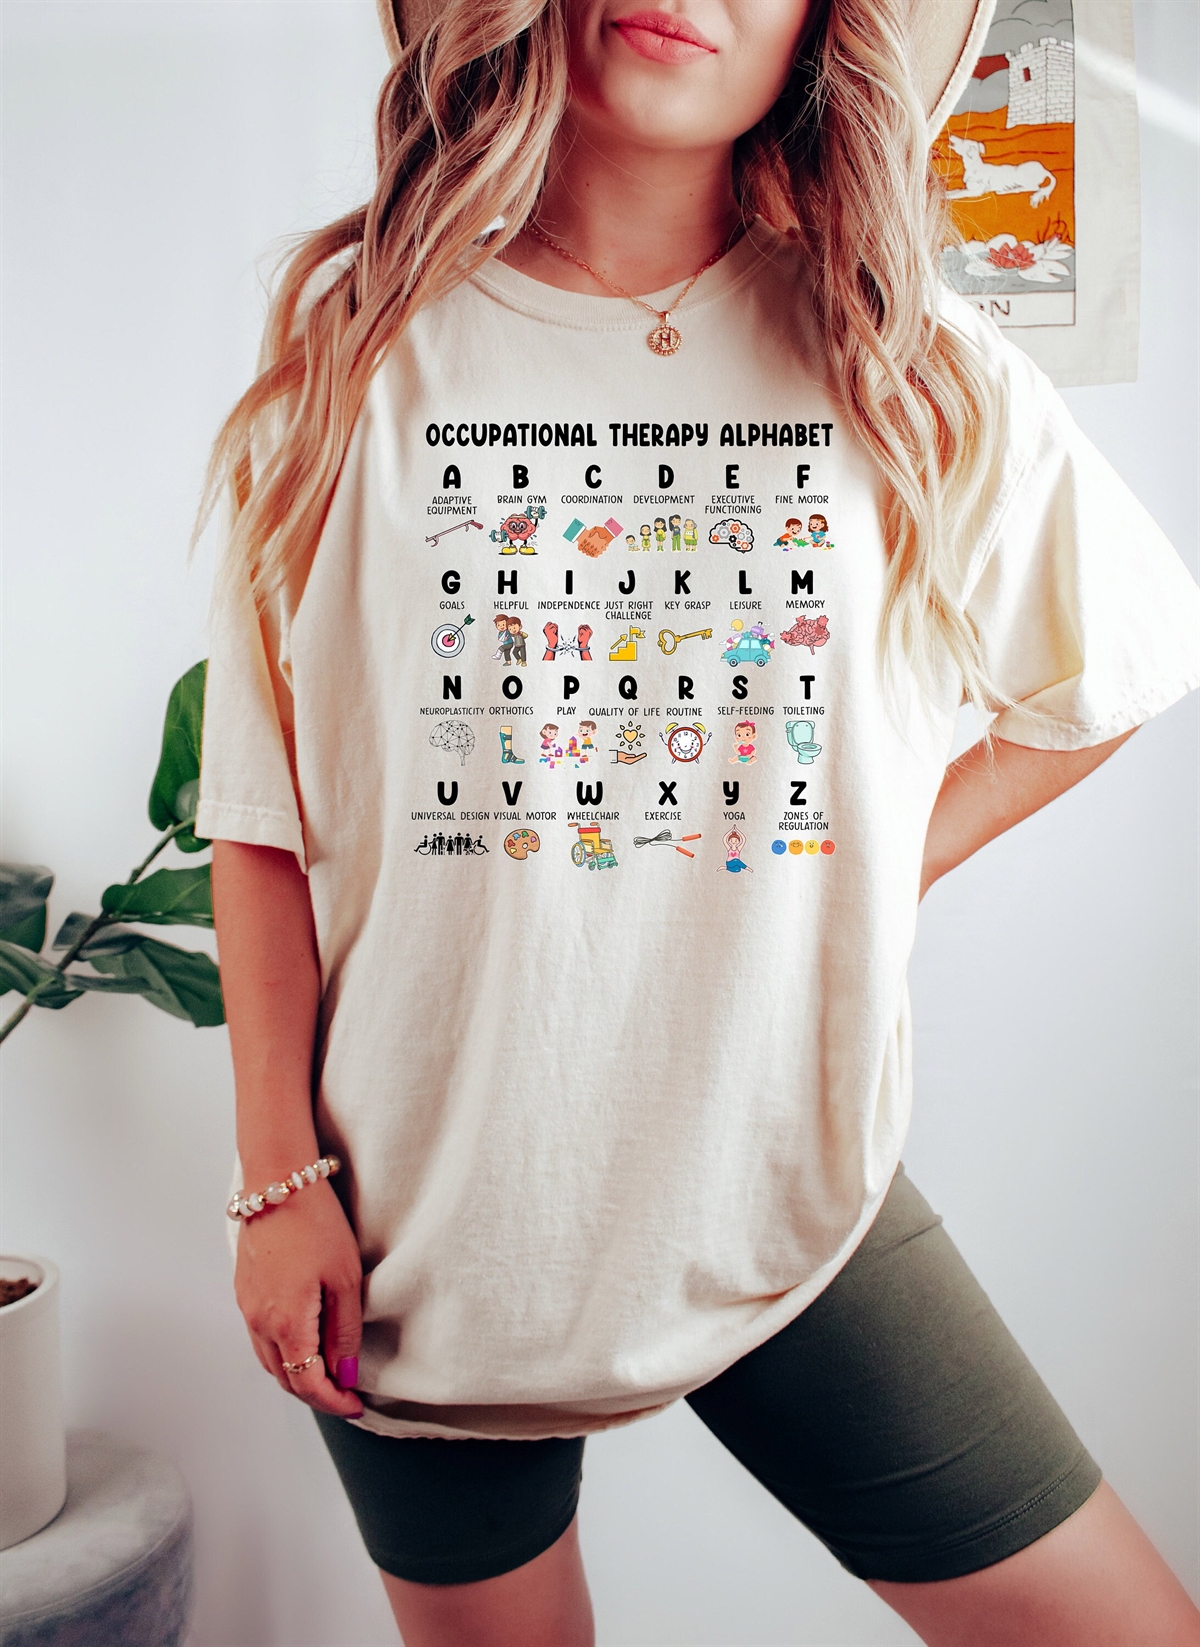 Occupational Therapy Alphabet T-shirt Ot T-shirt Therapist T-shirt Occupational Therapist T-shirt Abc Of Occupational Therapist T-shirt